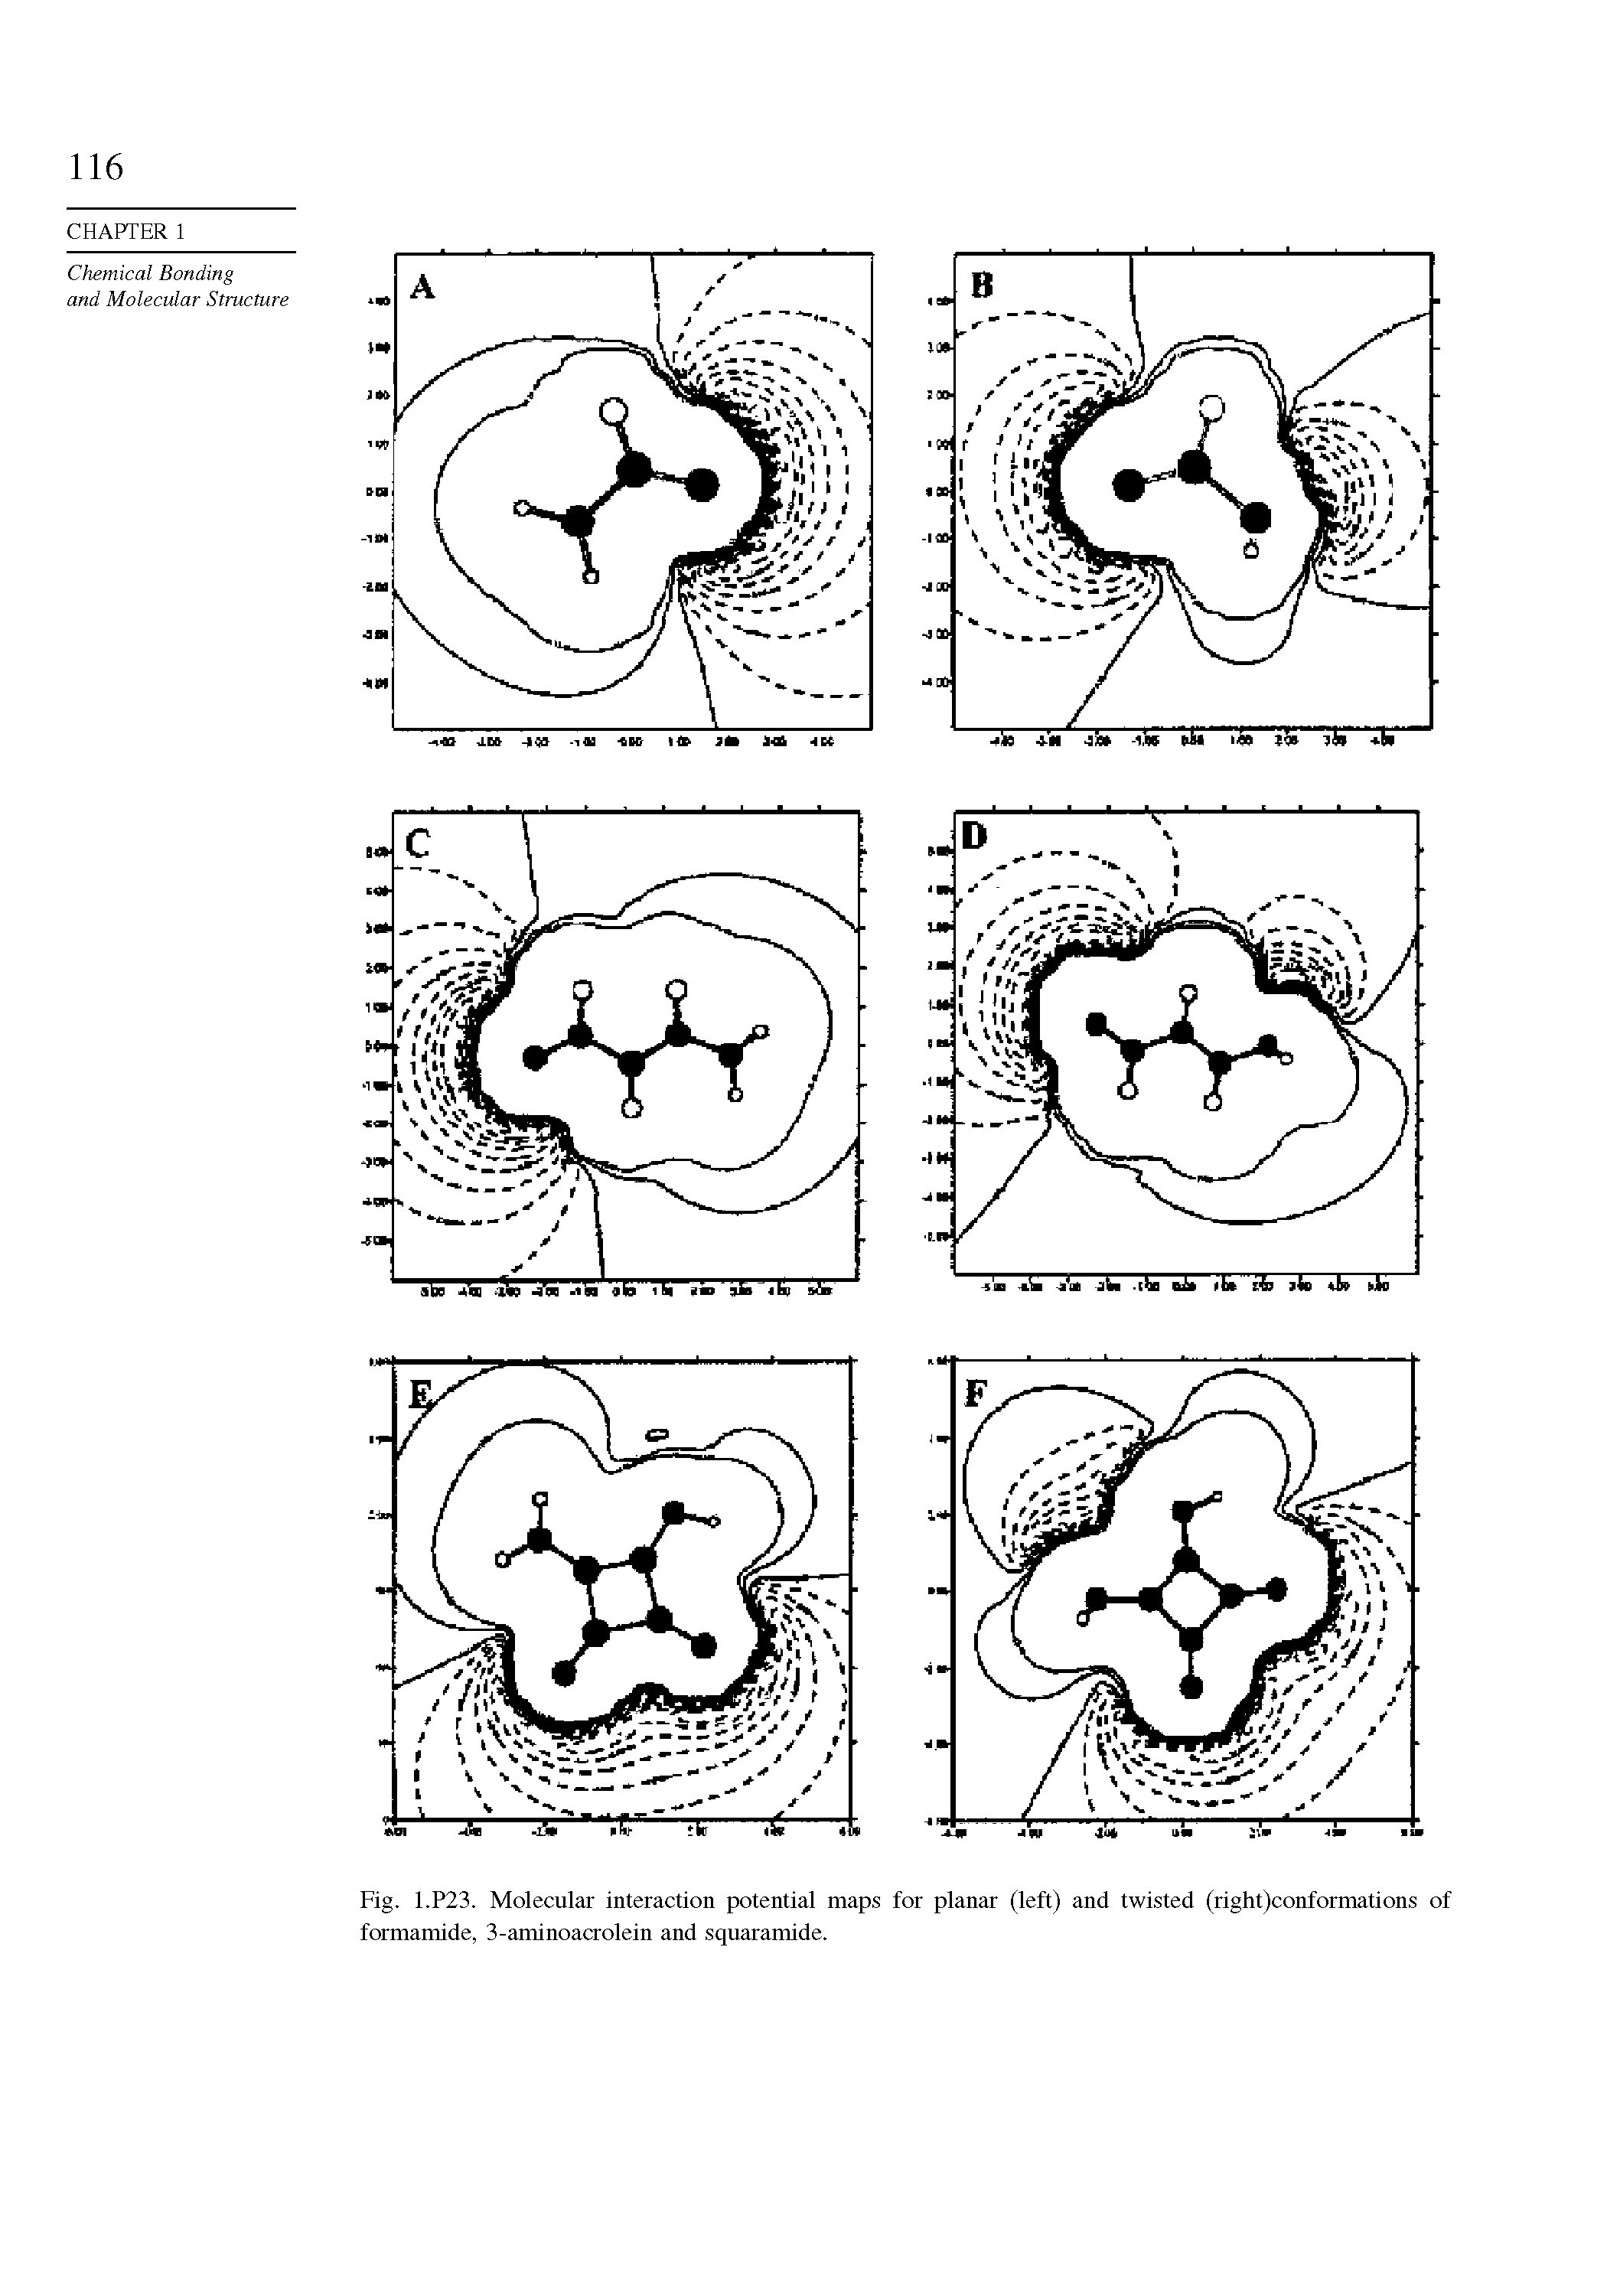 Fig. 1.P23. Molecular interaction potential maps for planar (left) and twisted (right)conformations of formamide, 3-aminoacrolein and squaramide.